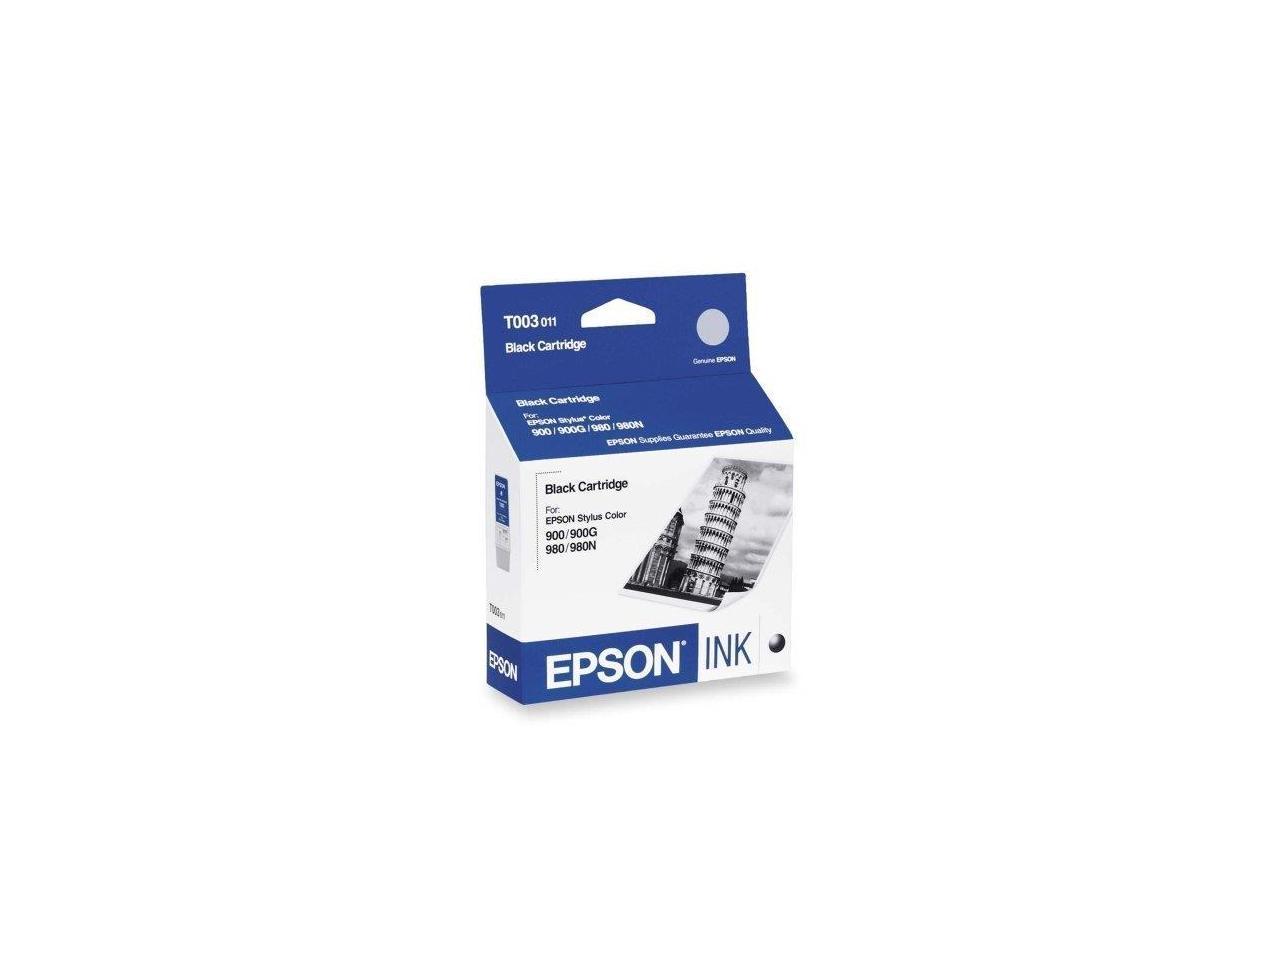 EPSON EPSON-003G SPARE PART CABLE NULL MODEM SERIAL DB-9 FEMALE TO DB-25 MALE 10 FT DARK GRAY